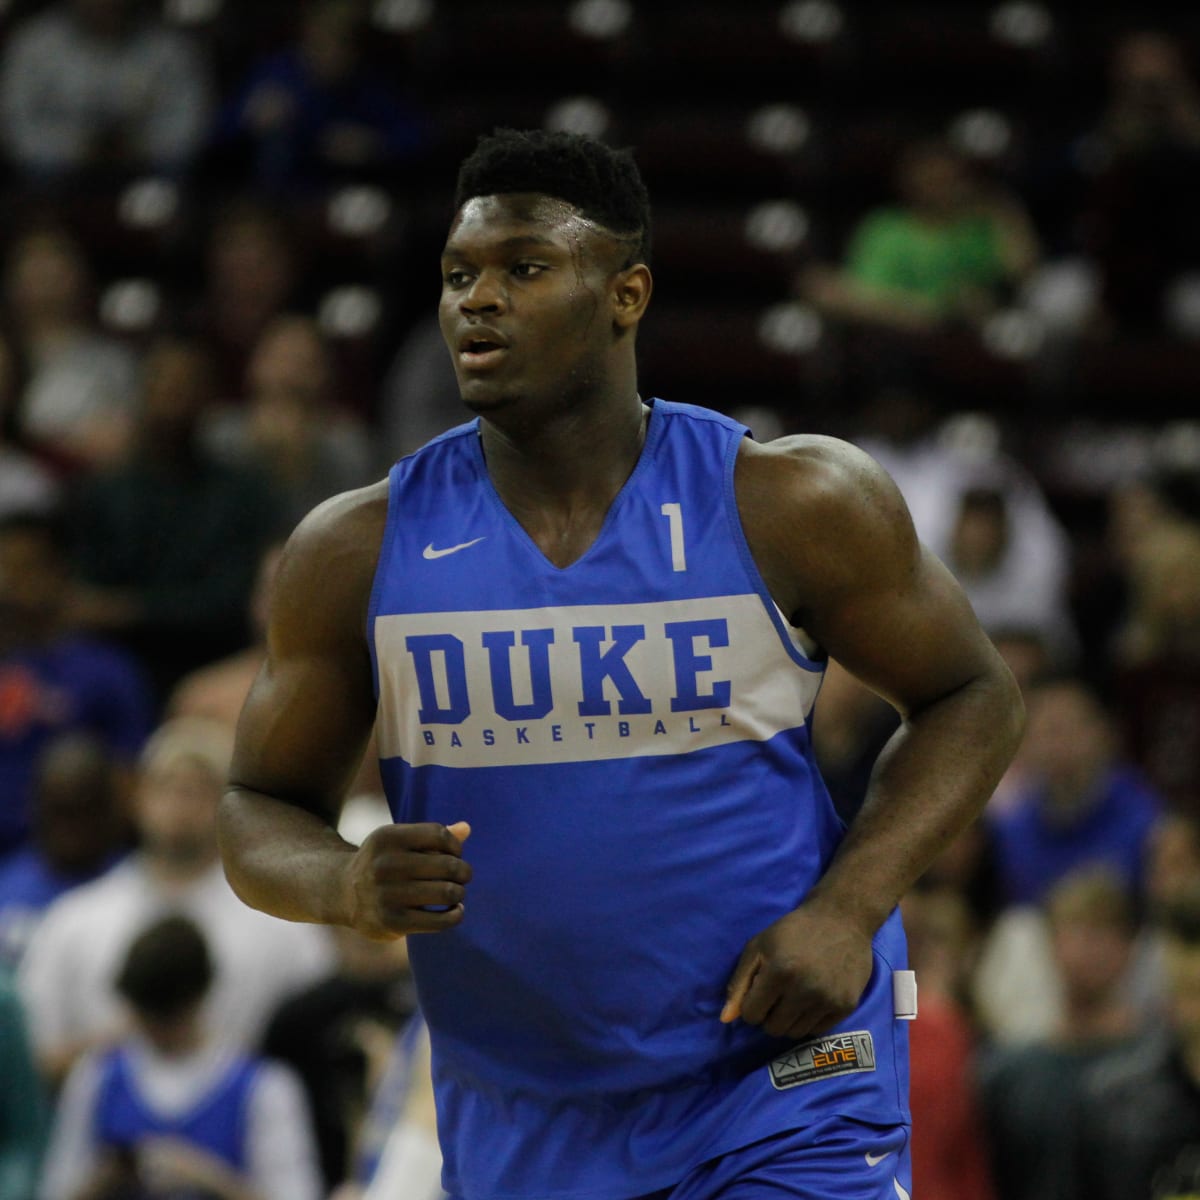 Duke basketball: Zion Williamson to cash in once again - Sports